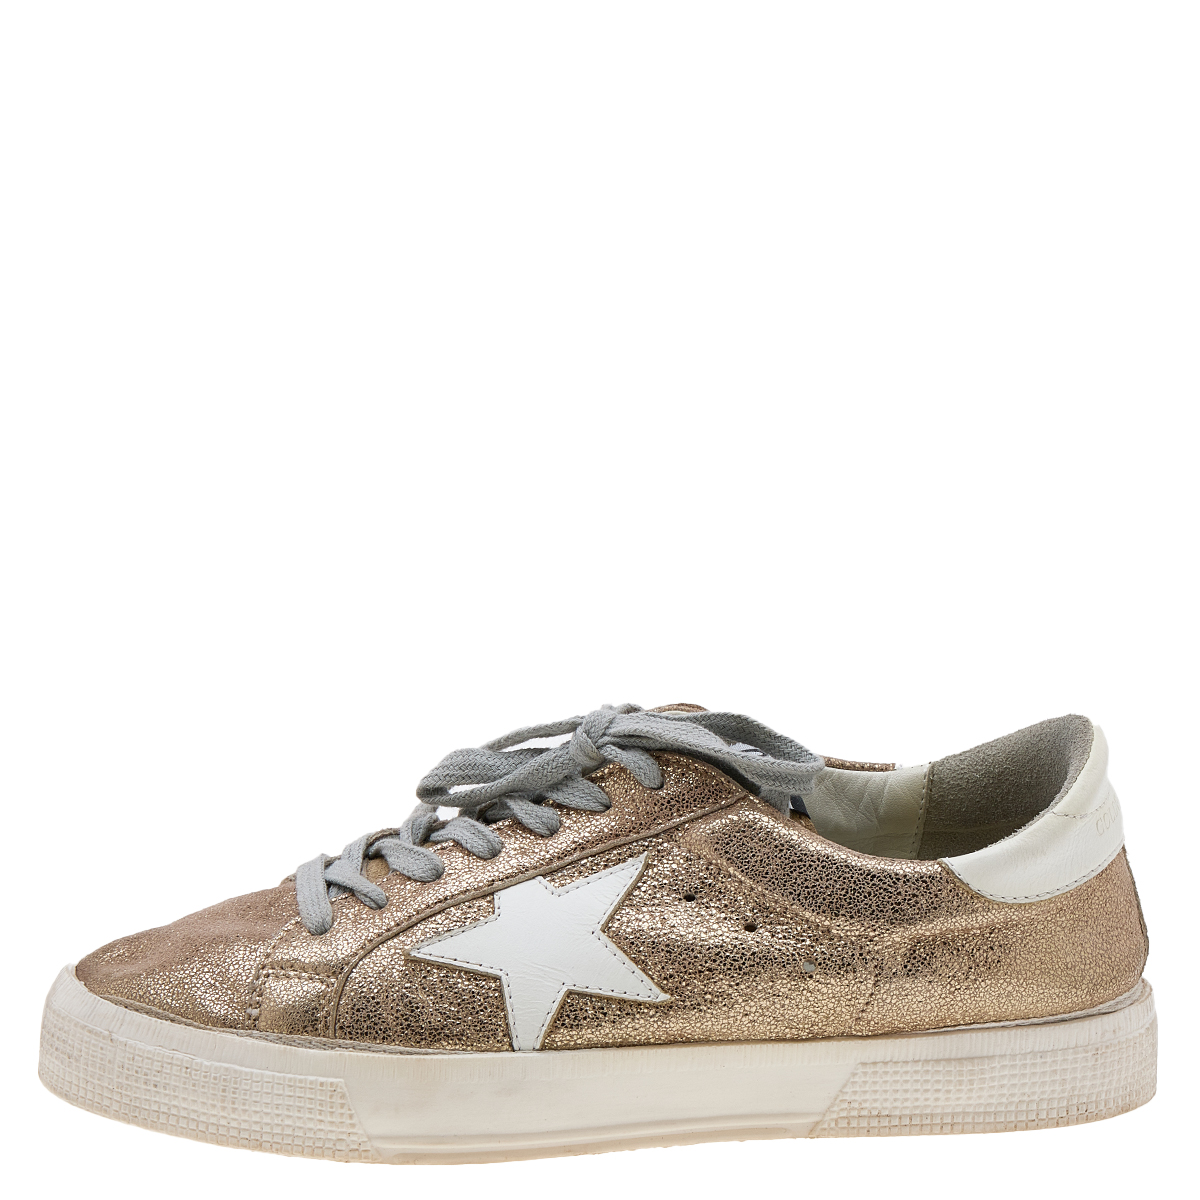 

Golden Goose Metallic Gold Crinkled Leather May Low Top Sneakers Size